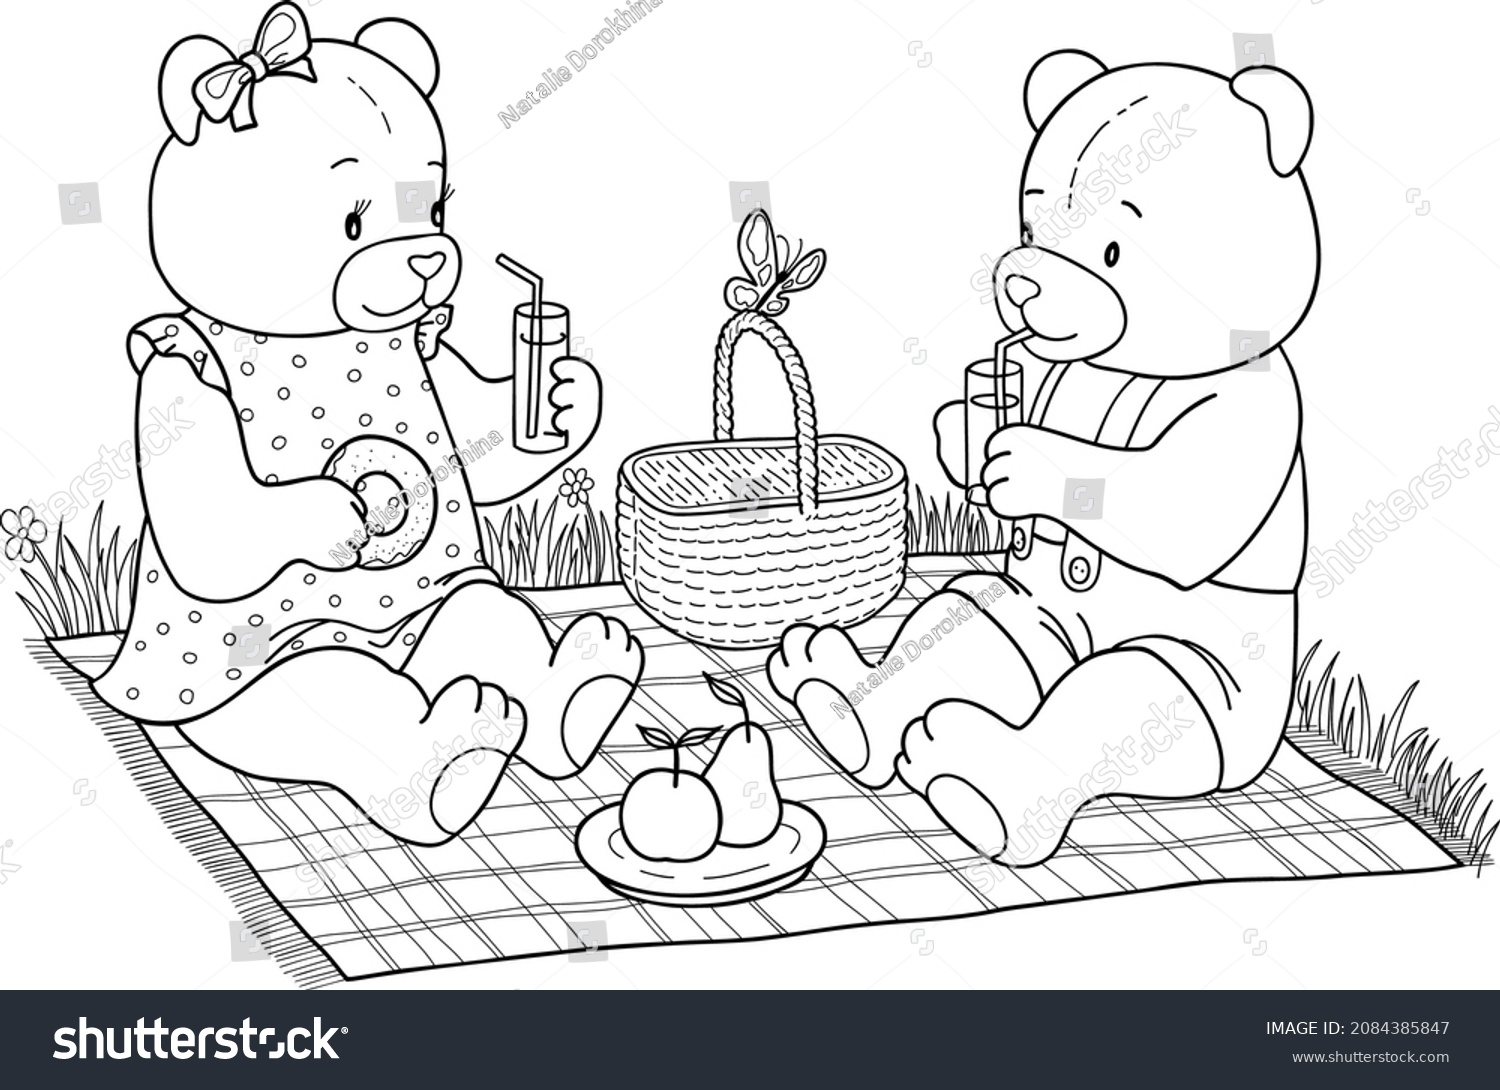 Handdrawn Coloring Page Teddy Bears On Stock Vector (Royalty Free ...